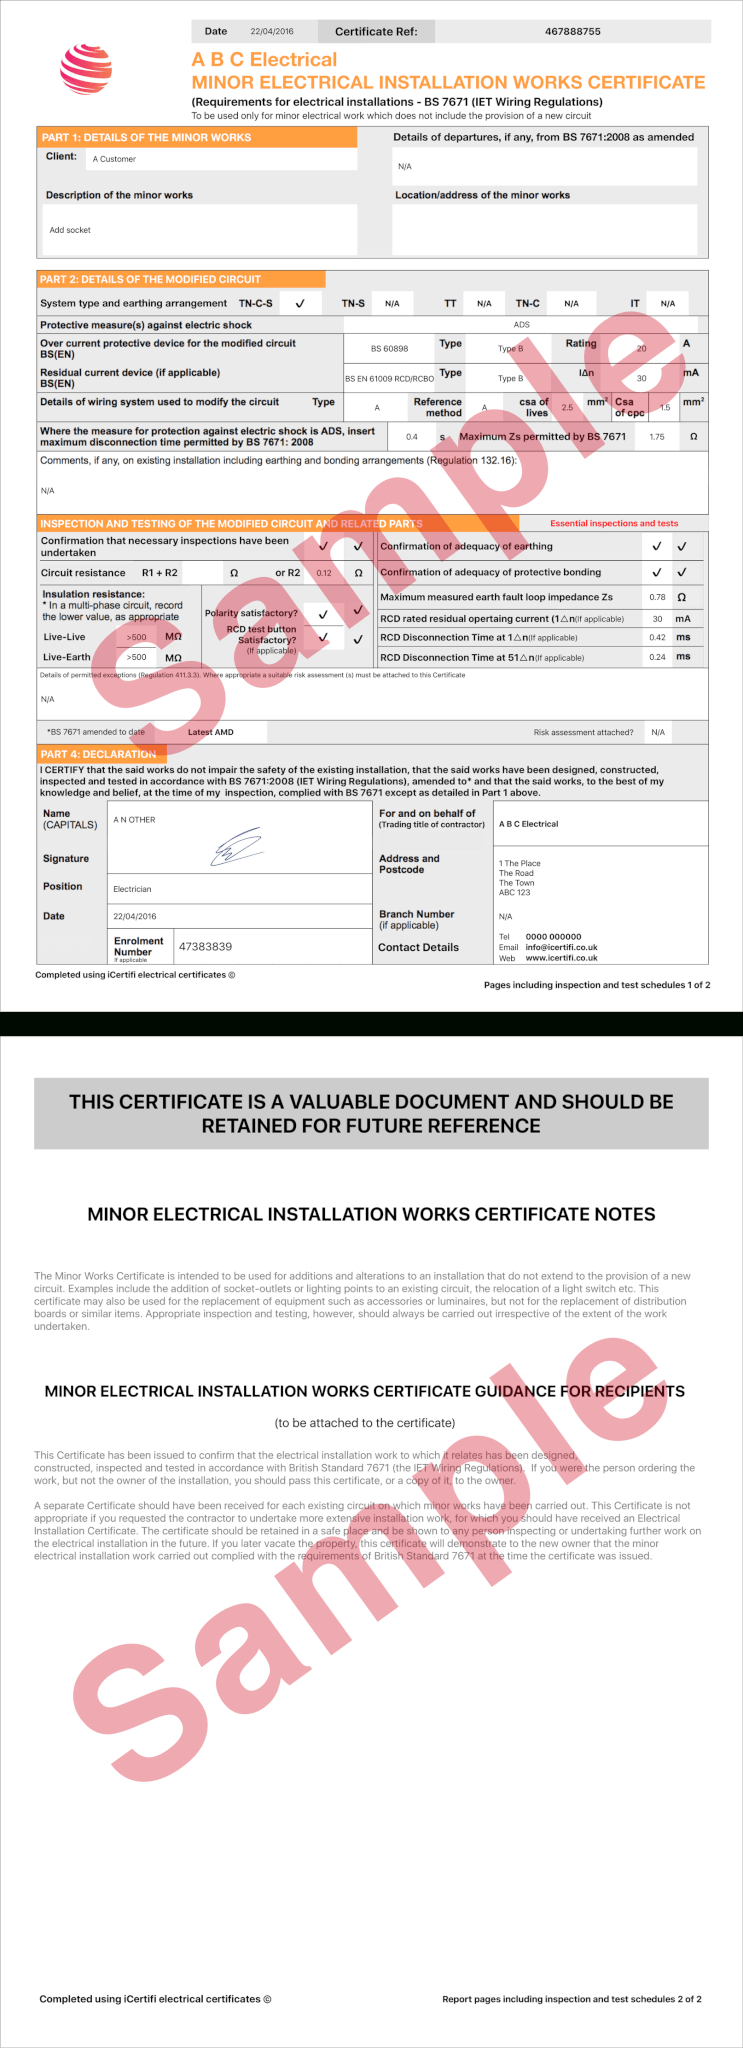 Electrical Certificate - Example Minor Works Certificate Throughout Minor Electrical Installation Works Certificate Template